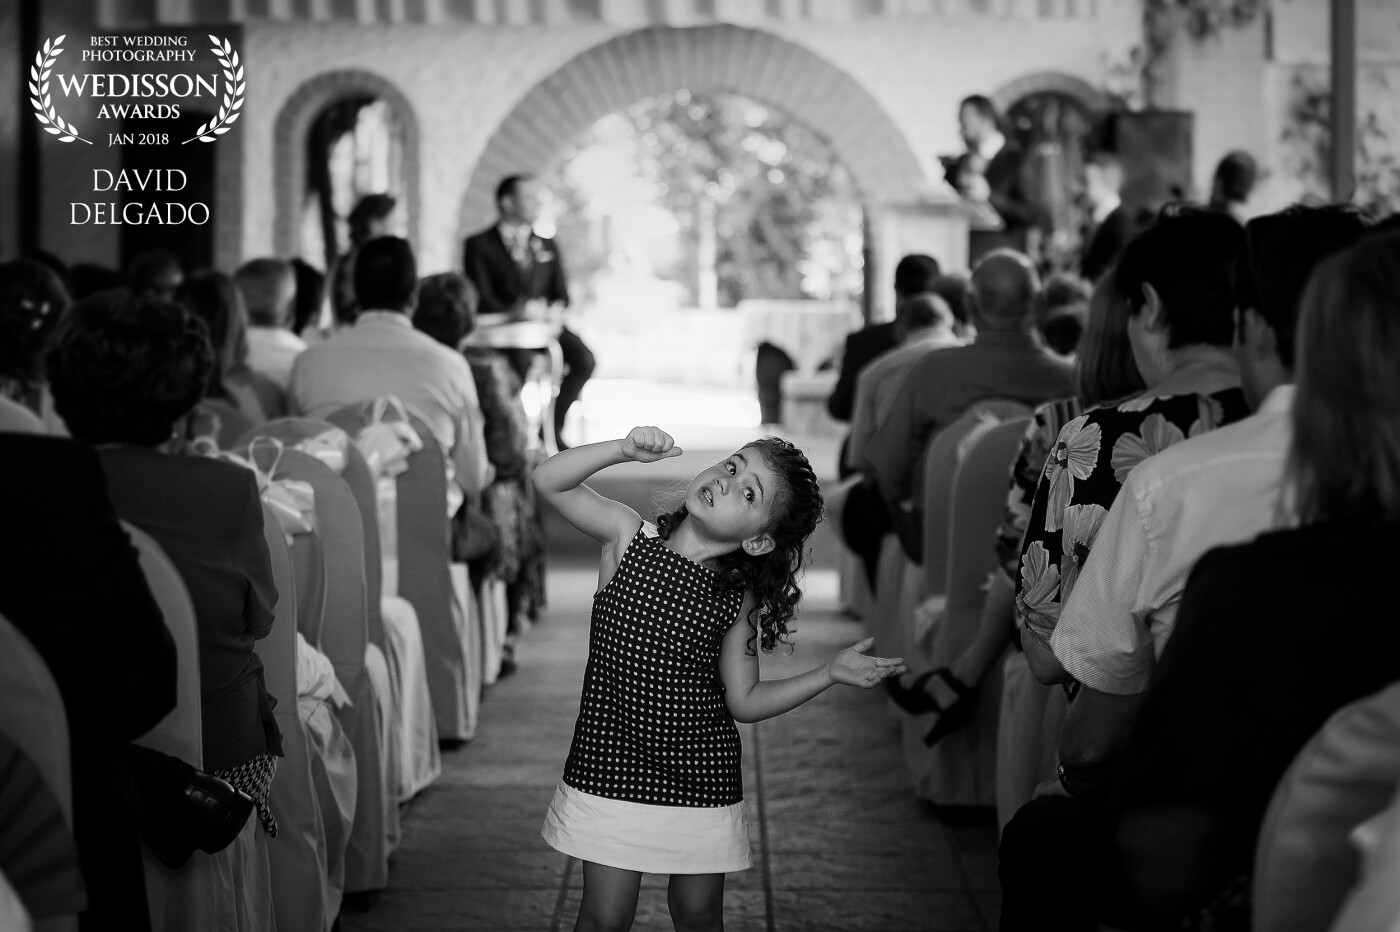 Infancia - We also love it when children are the protagonists at weddings. She is the daughter of an intimate friend of the bride and since she is an infant, she did not care much about the ceremony that was being held, because she lives her childhood. The celebration was in a famed land in the city of Lleida (Spain).